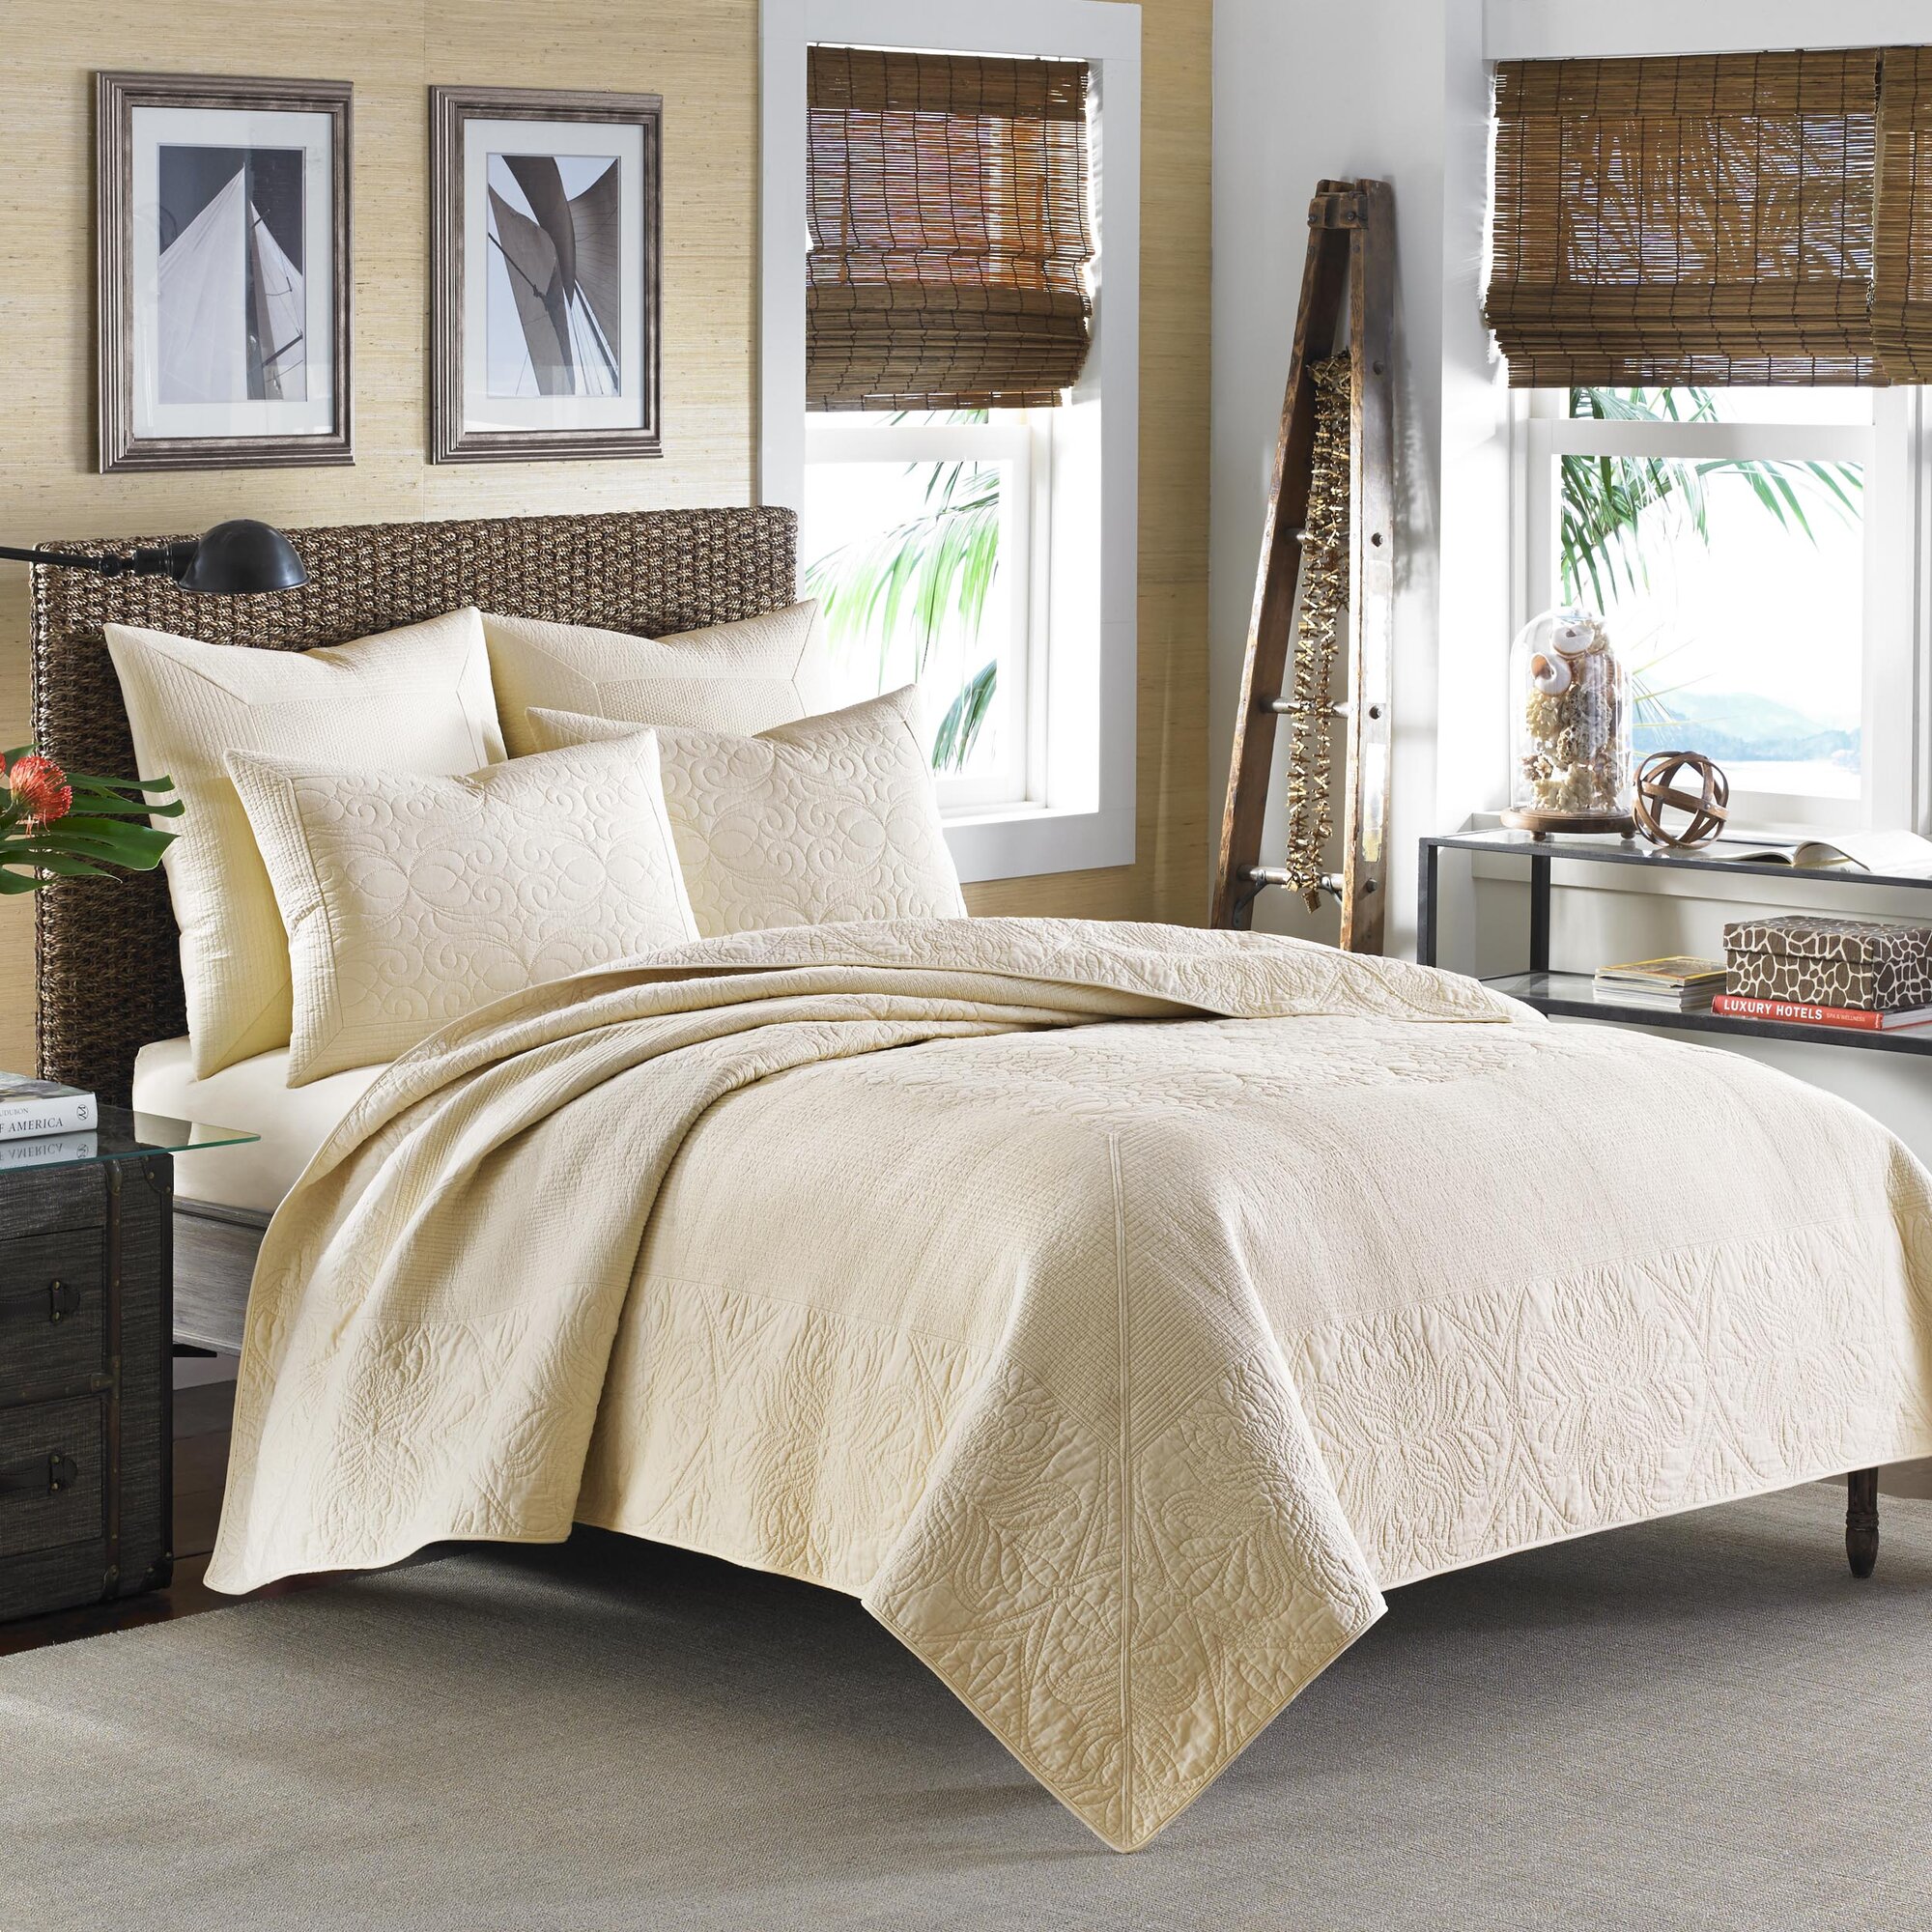 Tommy Bahama Bedding Nassau Quilt & Reviews